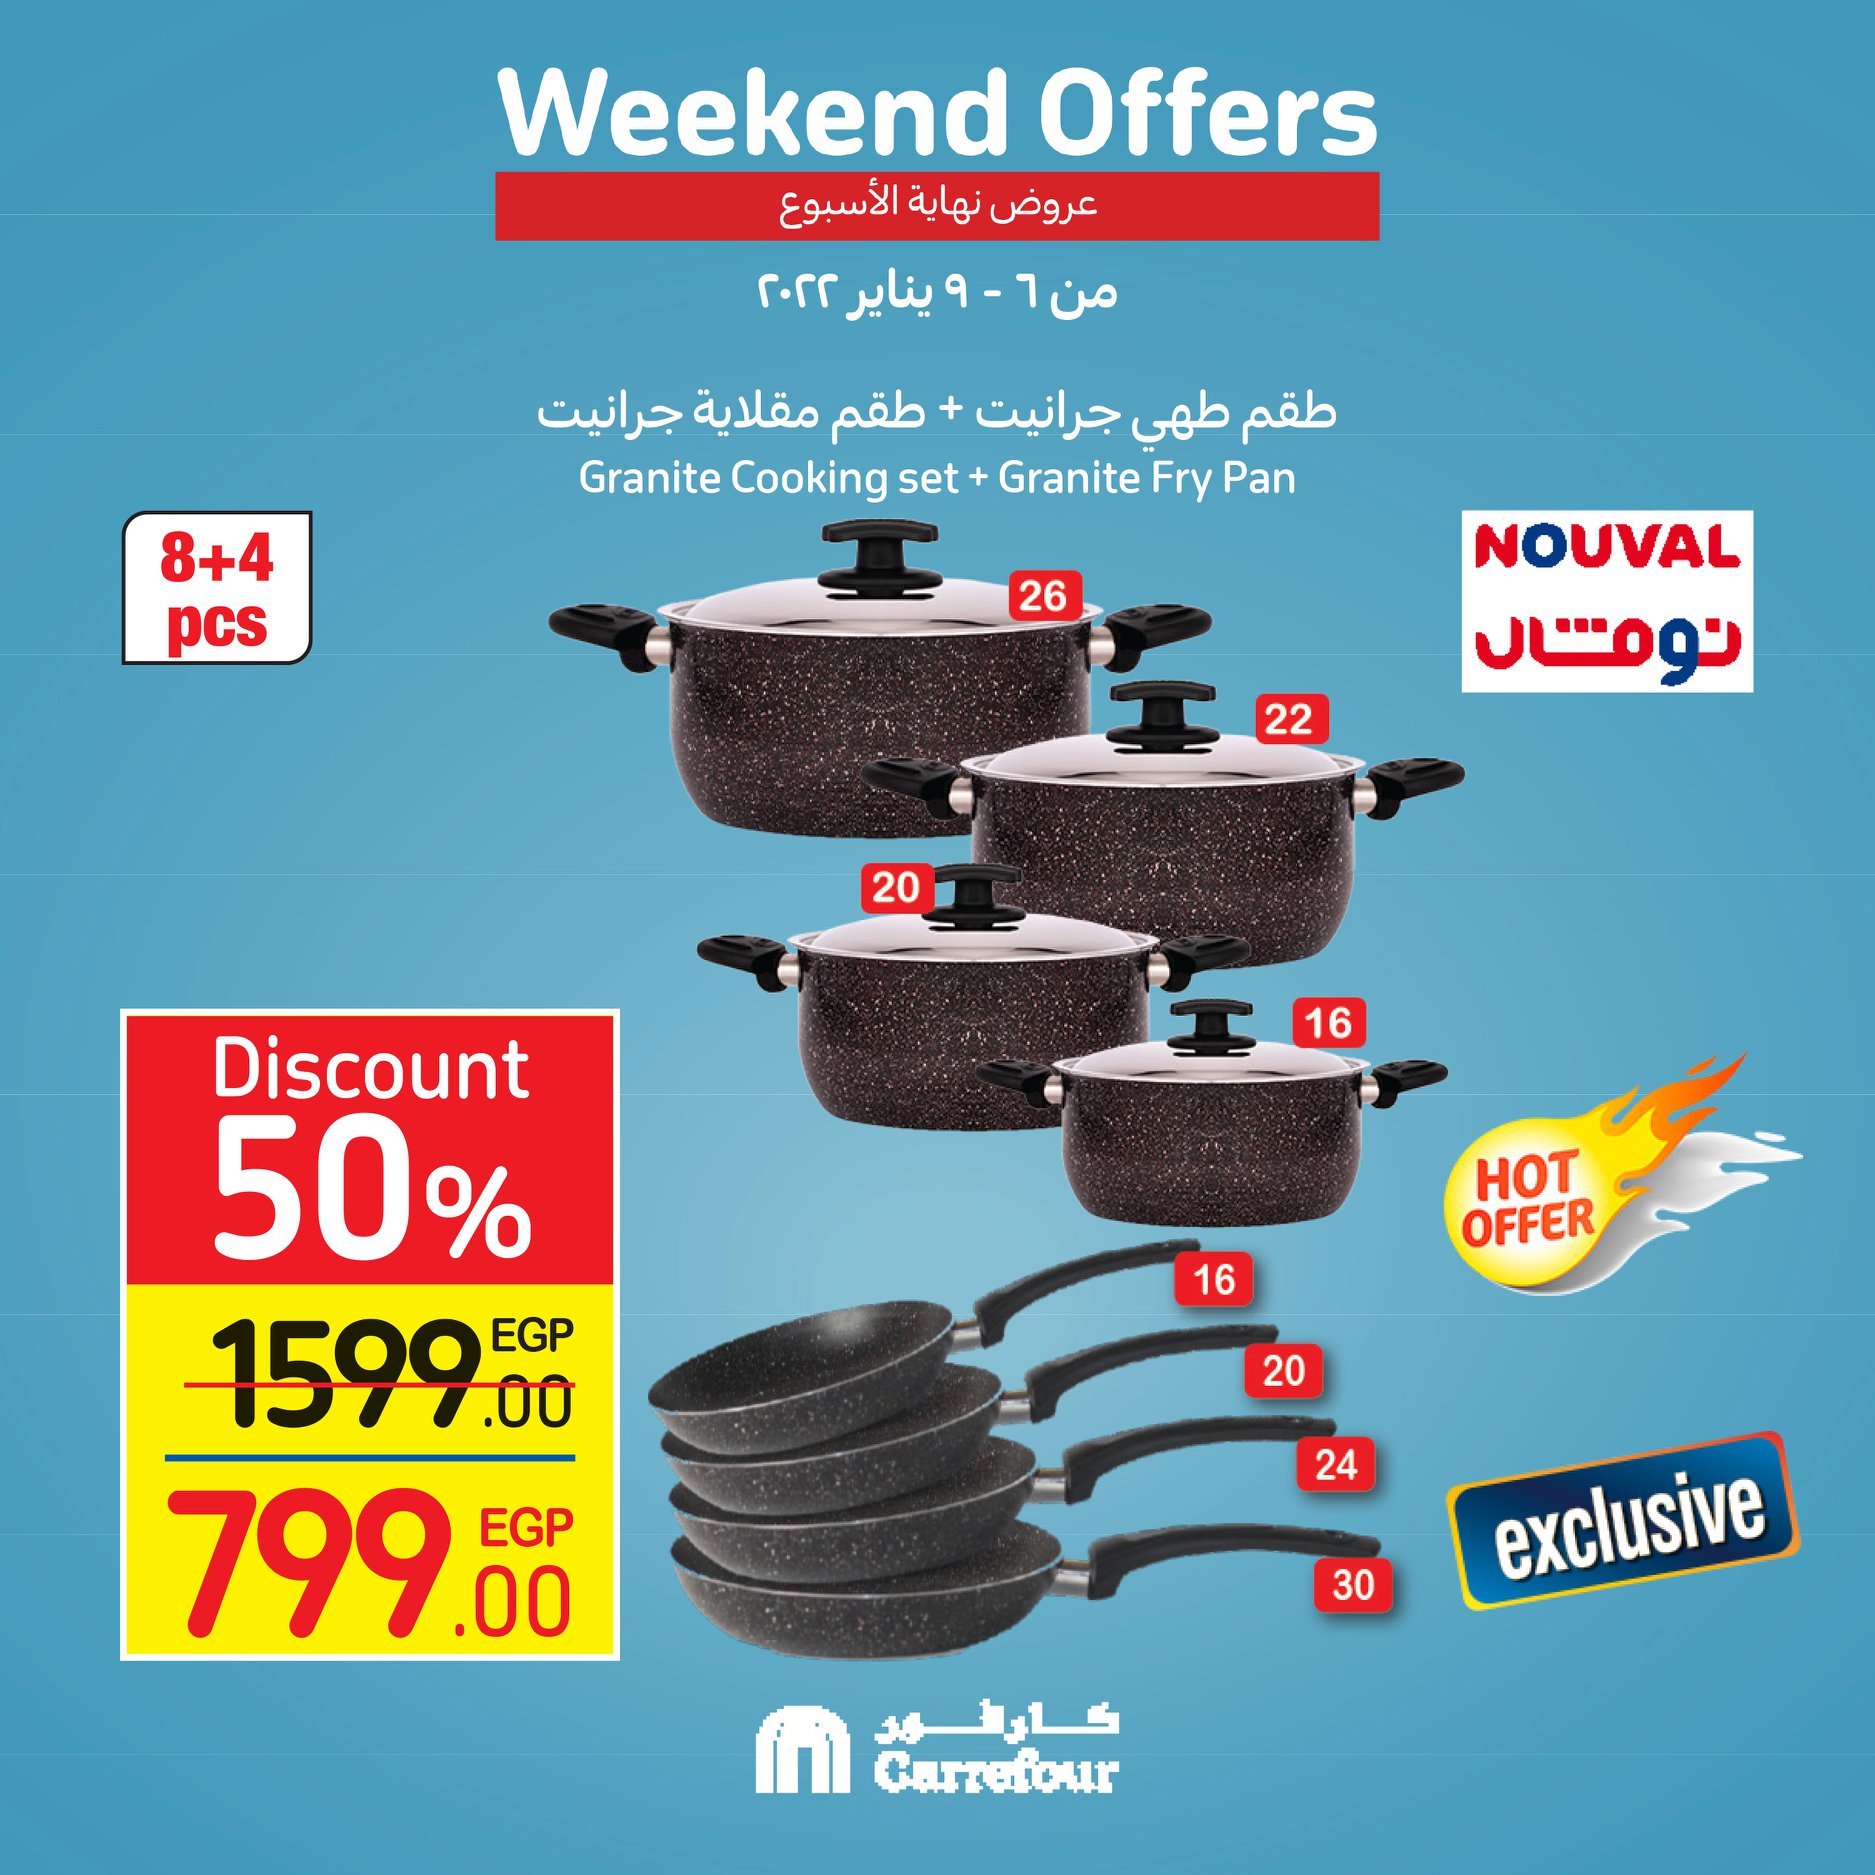 Now, the strongest offers and surprises from Carrefour, half-price discounts, at Weekend until January 16th, 30